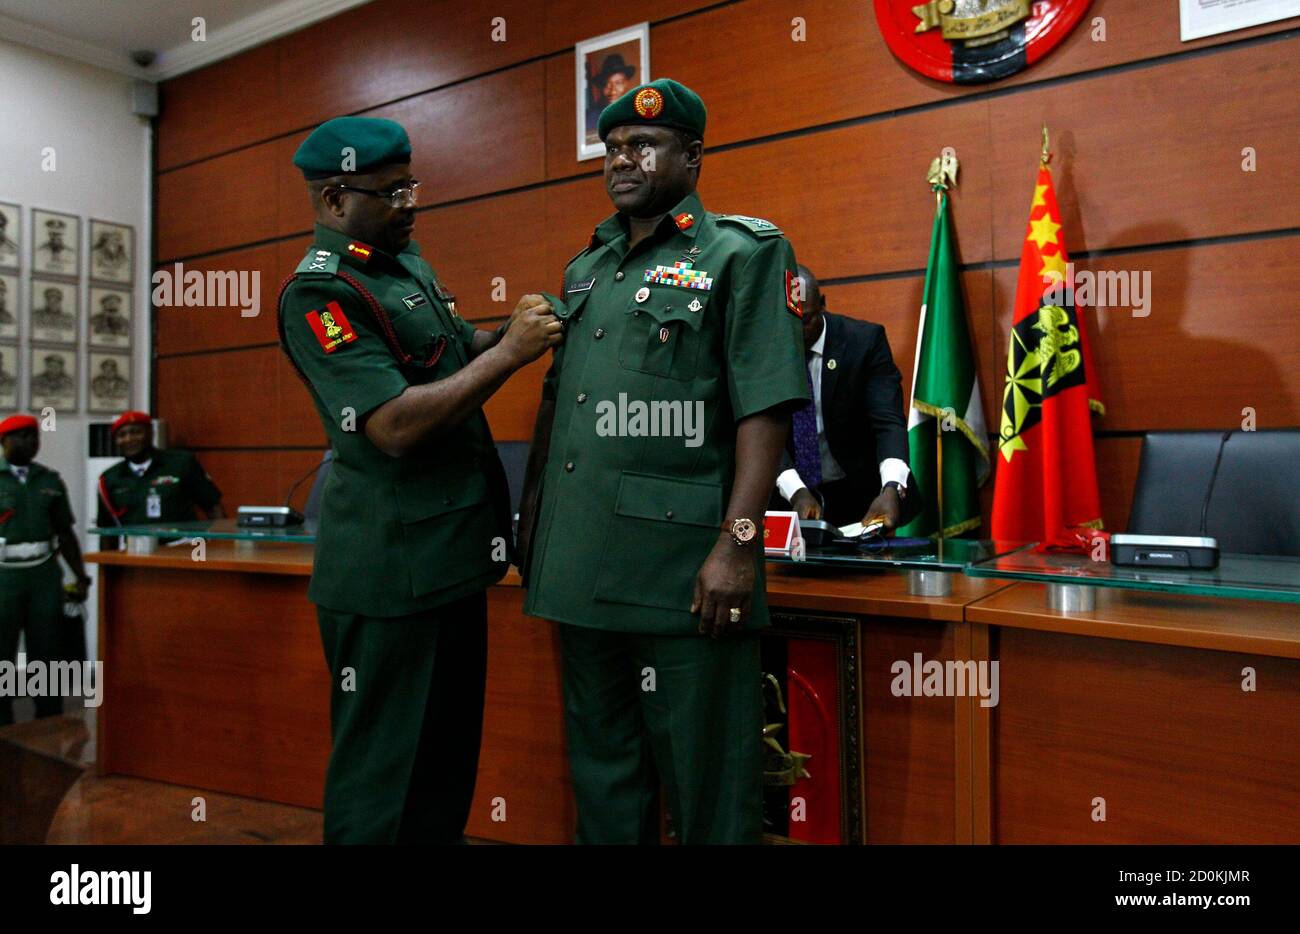 The New Chief Of Army Staff / Buhari Appoints Maj Gen Farouk Yahaya As Chief Of Army Staff Dailytrust / Armed forces chief of staff general francois lecointre has responded to the second letter by asserting that its authors should leave the military.